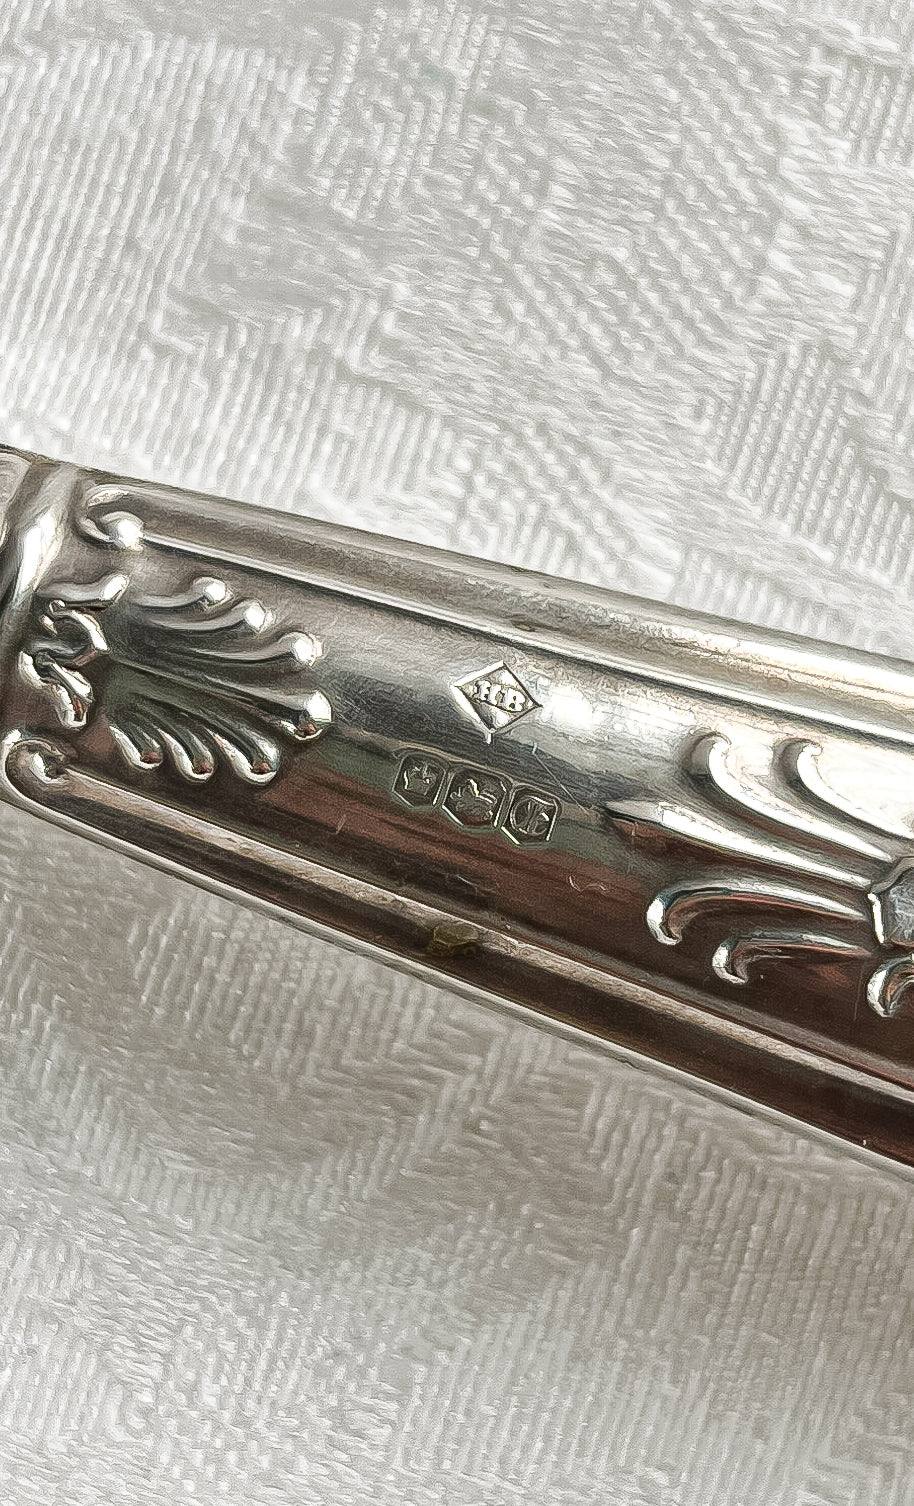 Harrison Brothers Sheffield Sterling Silver Pie Server with Stainless Steel Blade Circa 1973 - 'Kings' Pattern - SOSC Home